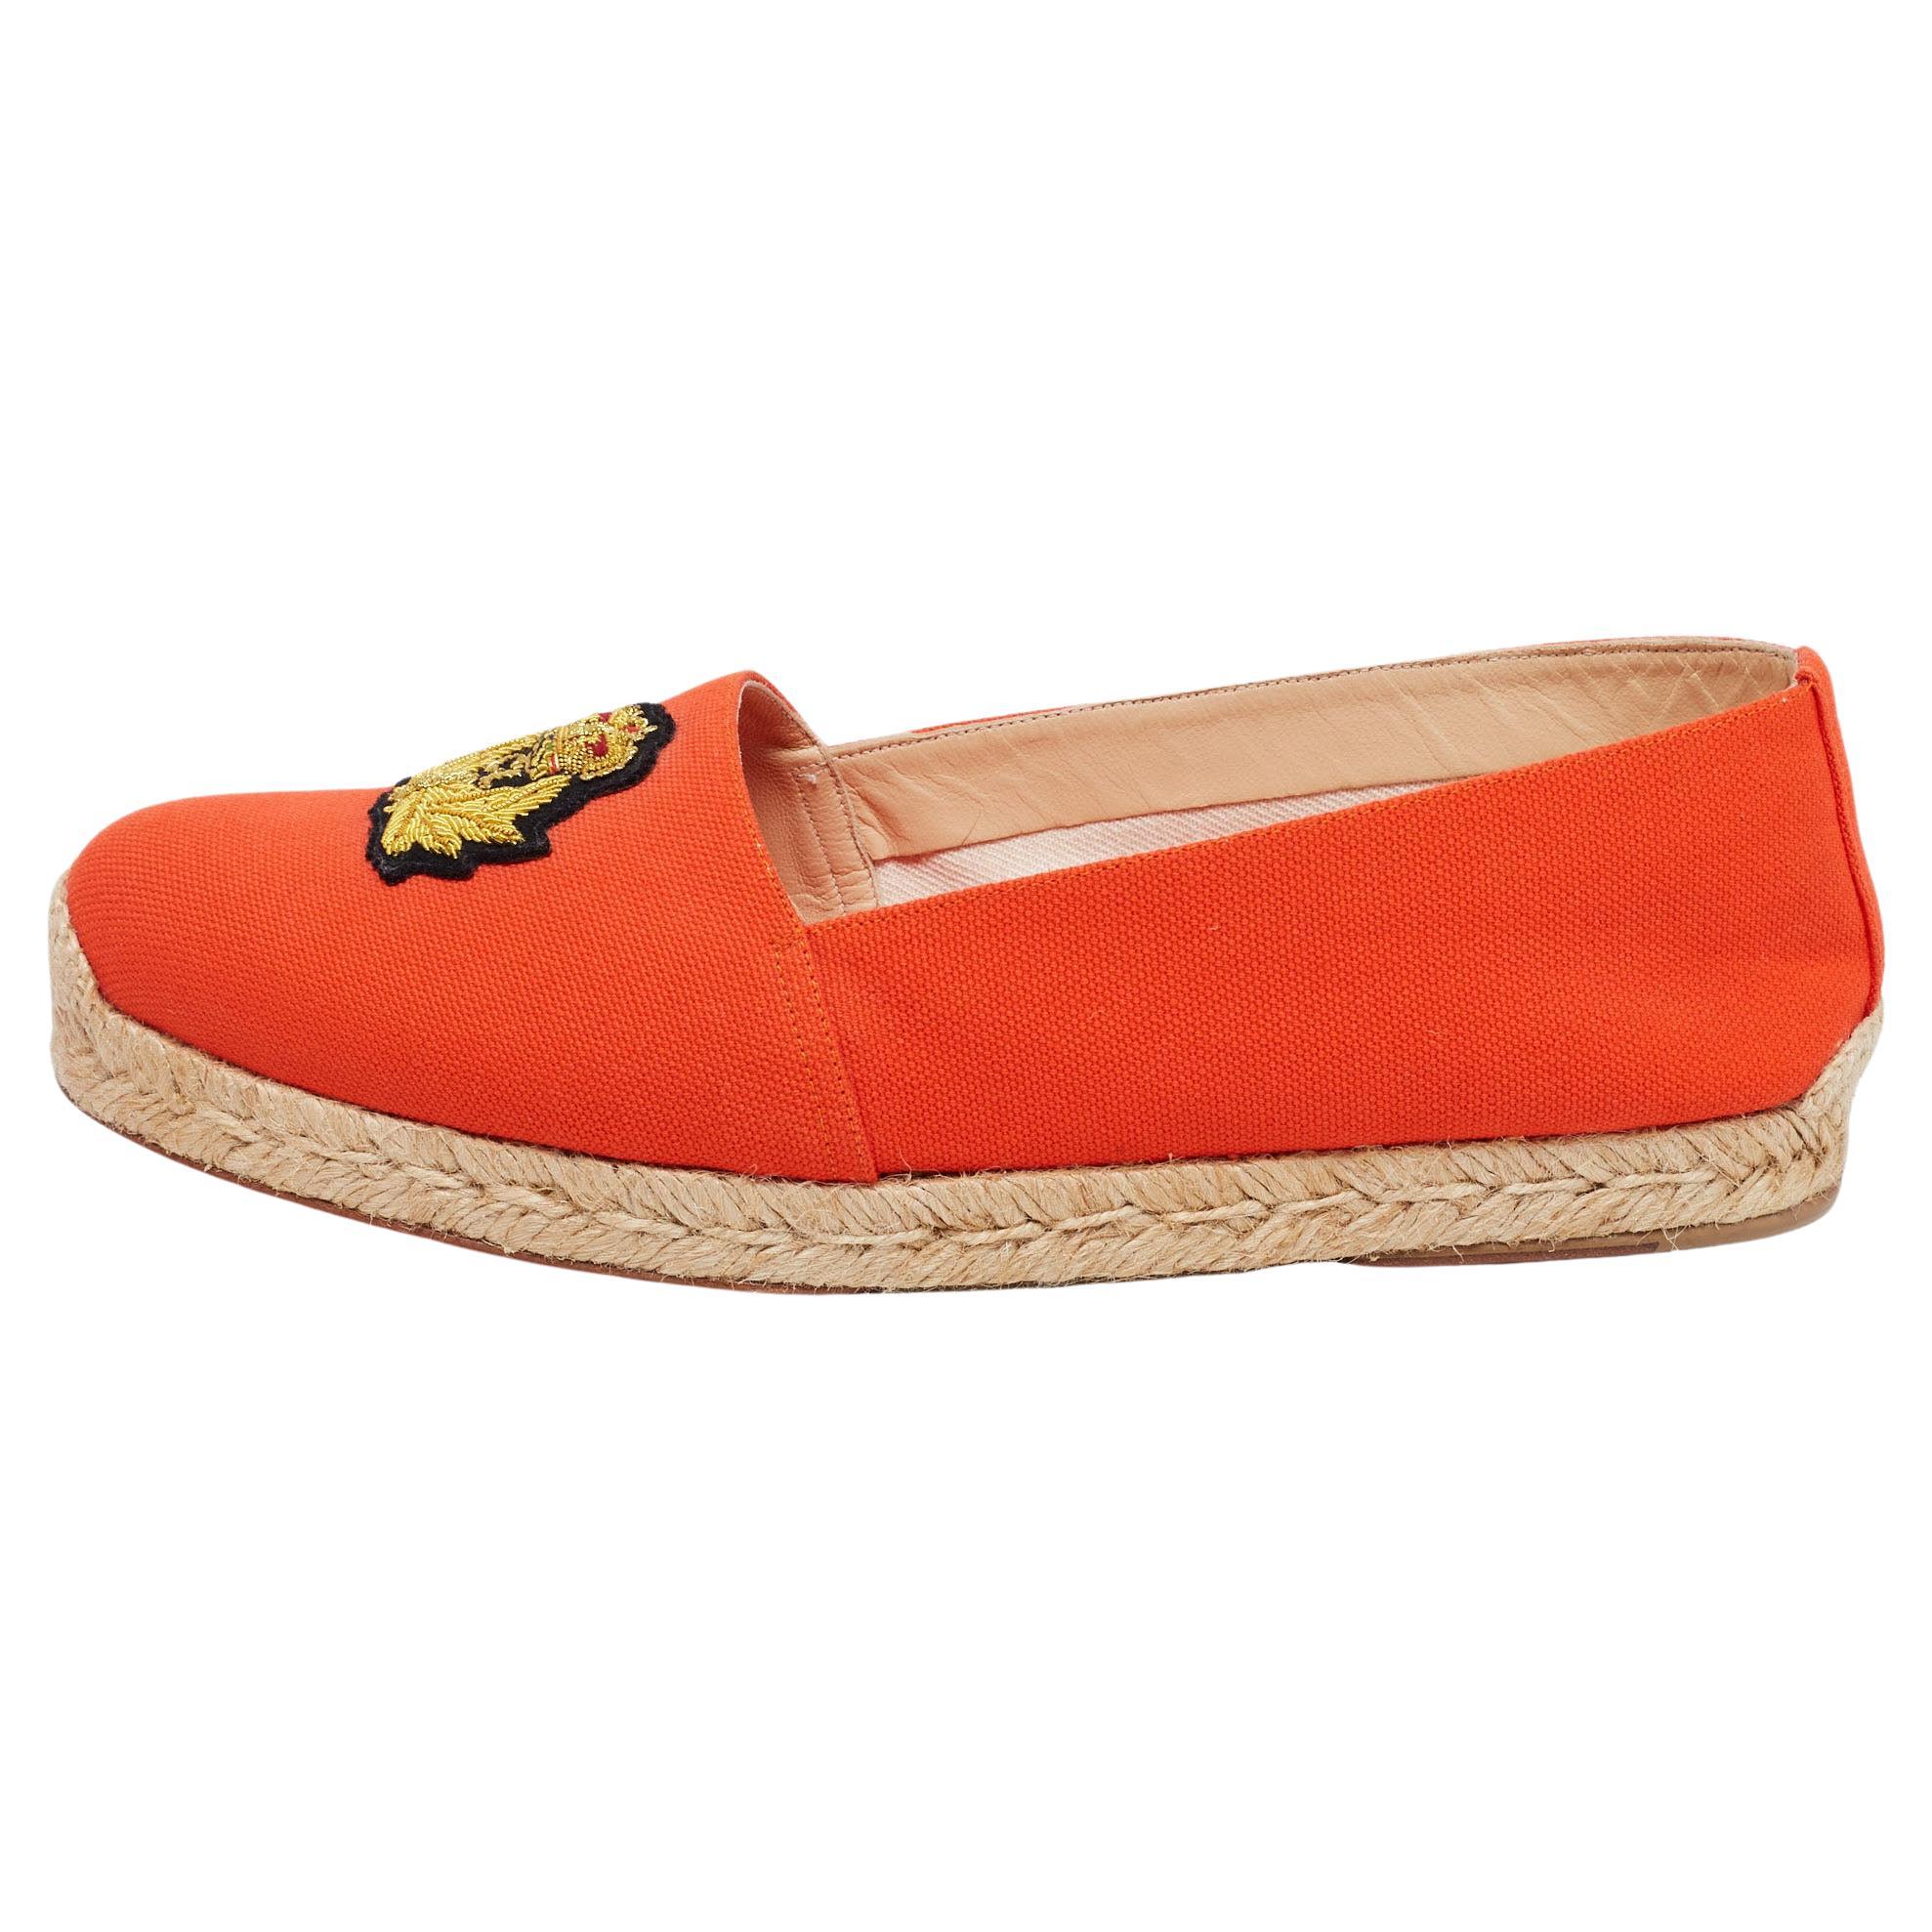 Christian Louboutin Orange Canvas Gala Embroidered Crest Espadrille Loafers For Sale